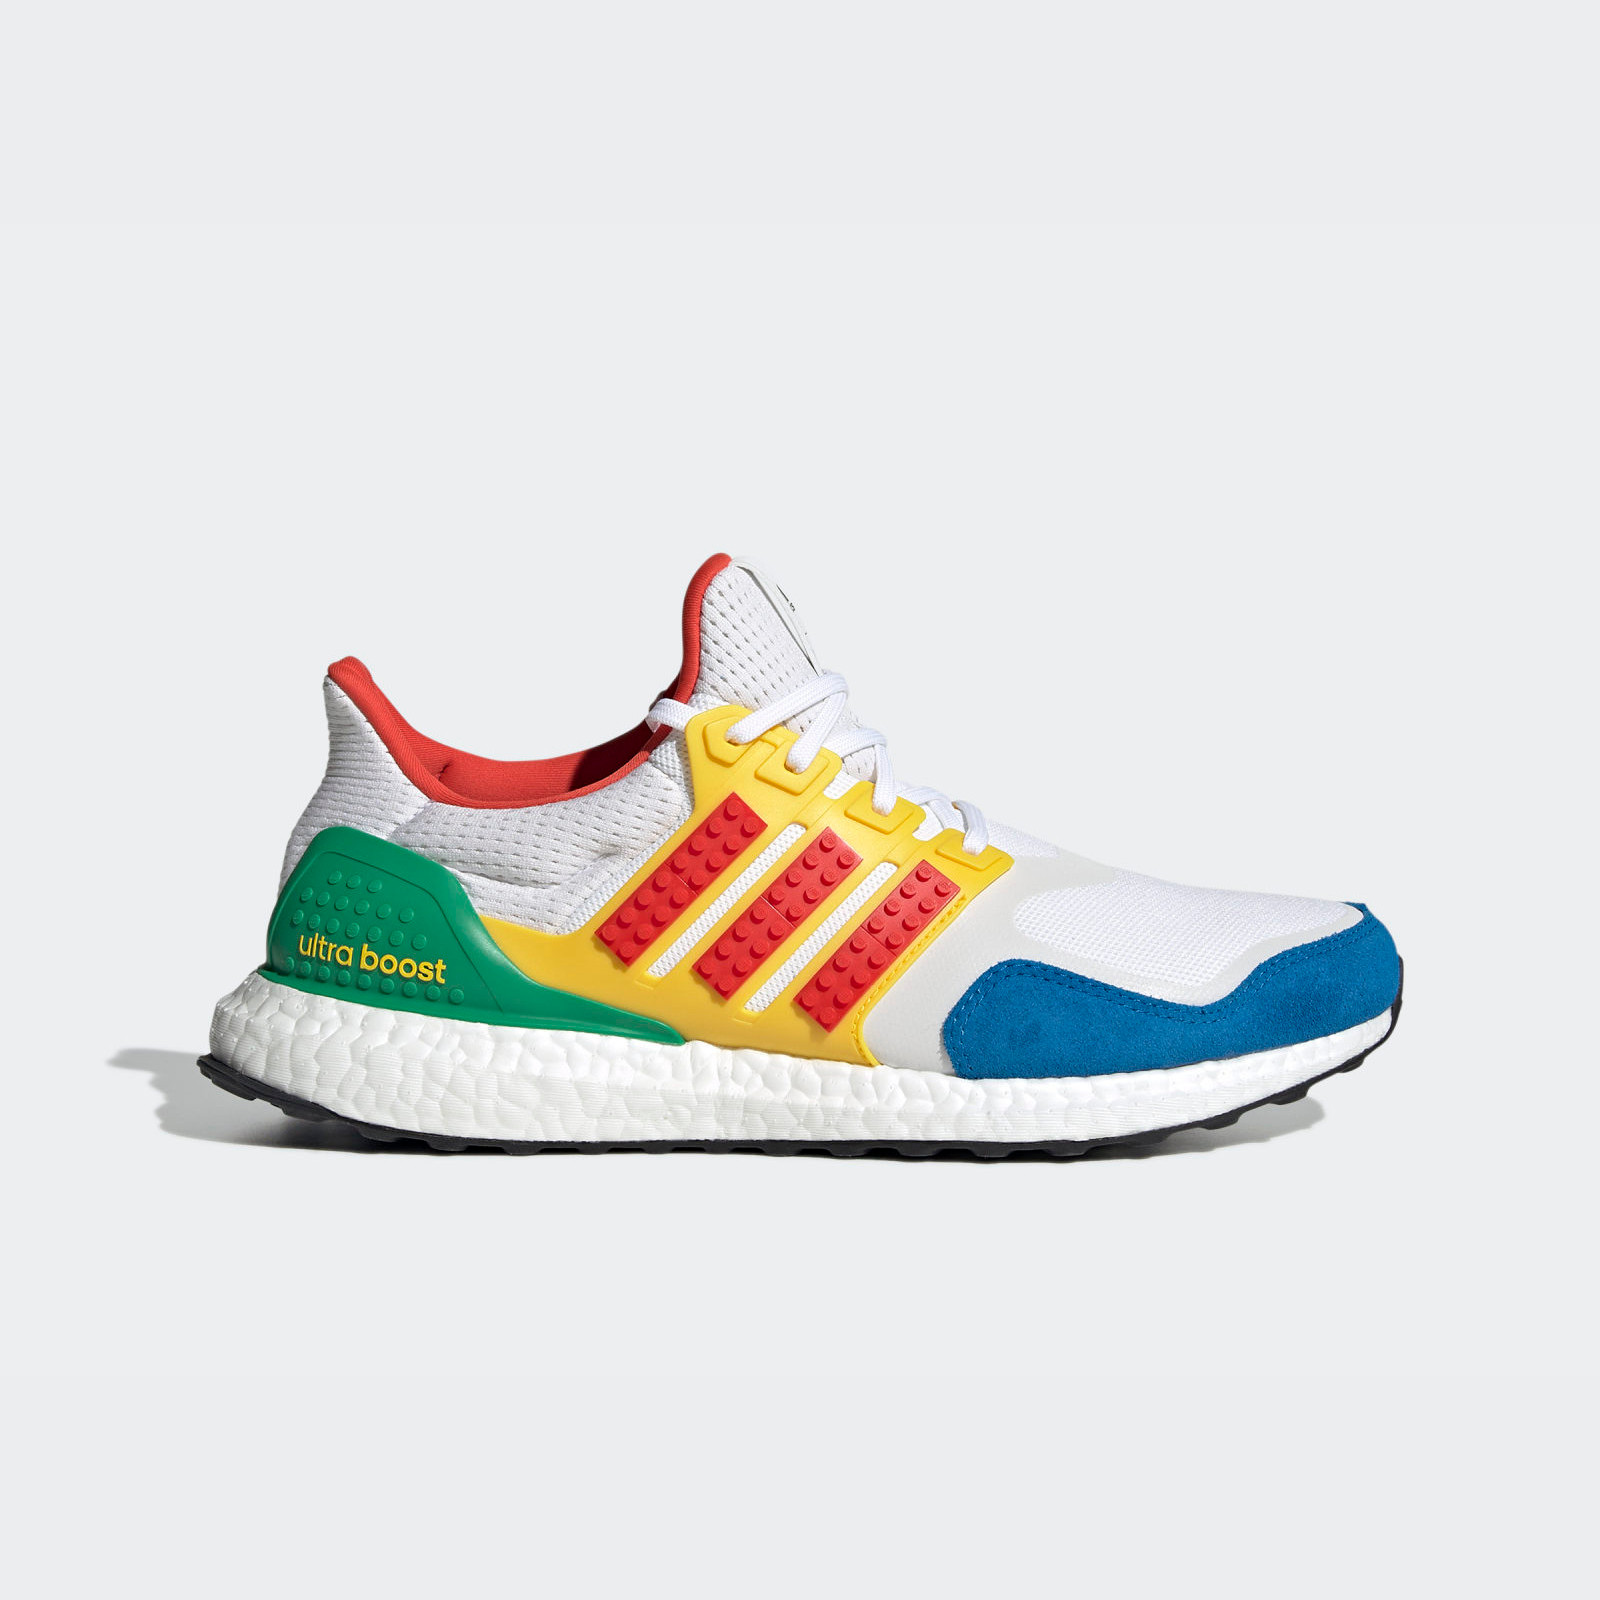 Adidas Ultra Boost
White / Red
Blue / Green